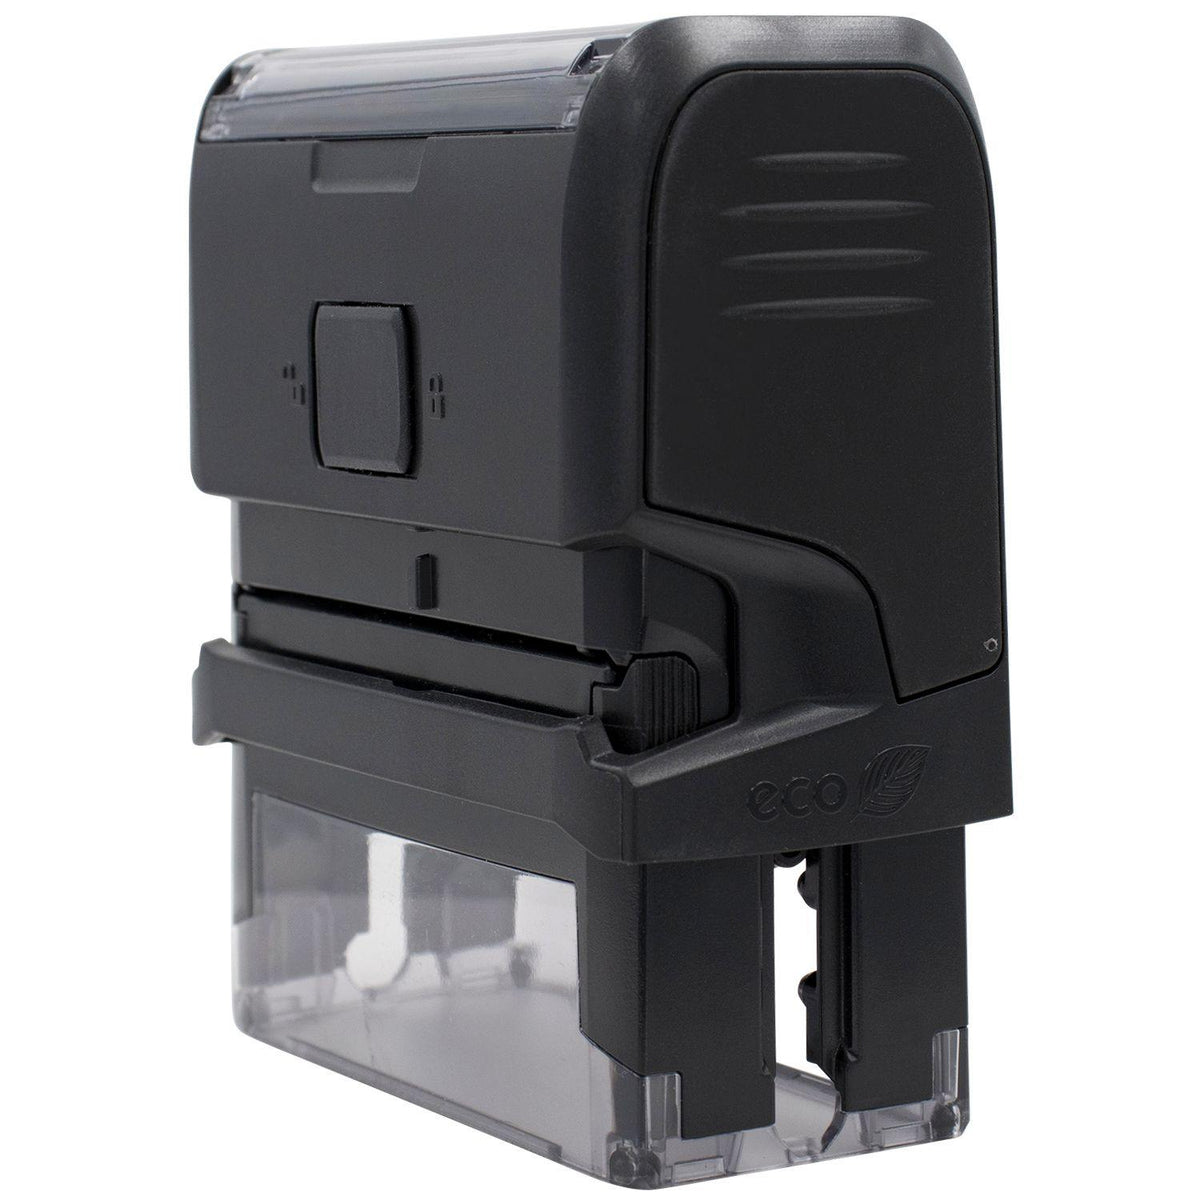 Self-Inking Viral Load Stamp - Engineer Seal Stamps - Brand_Trodat, Impression Size_Small, Stamp Type_Self-Inking Stamp, Type of Use_Medical Office